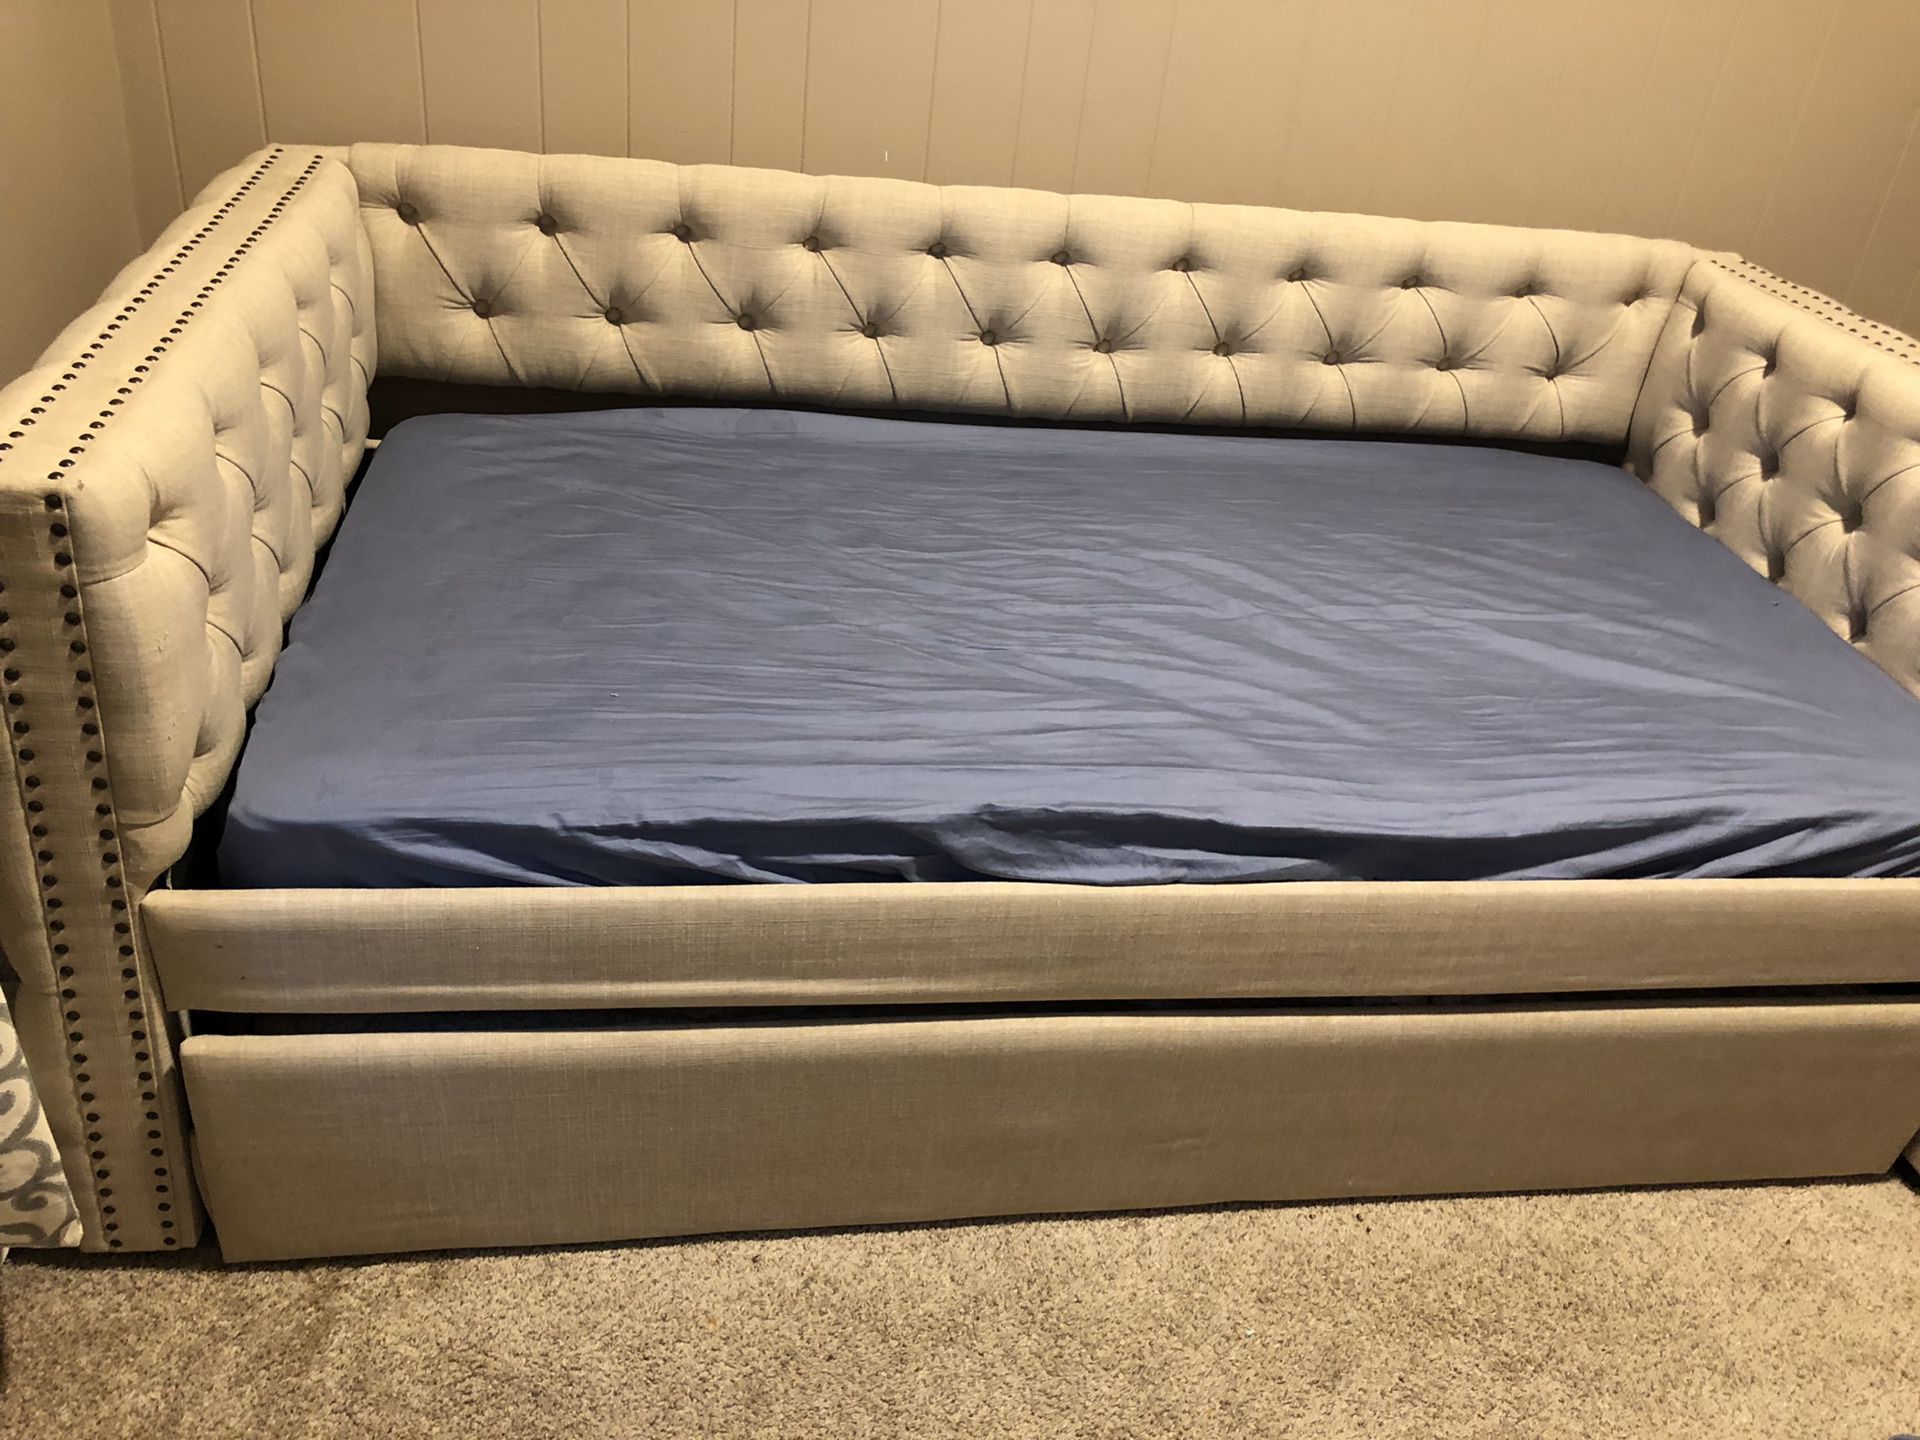 Day bed frame with pull out